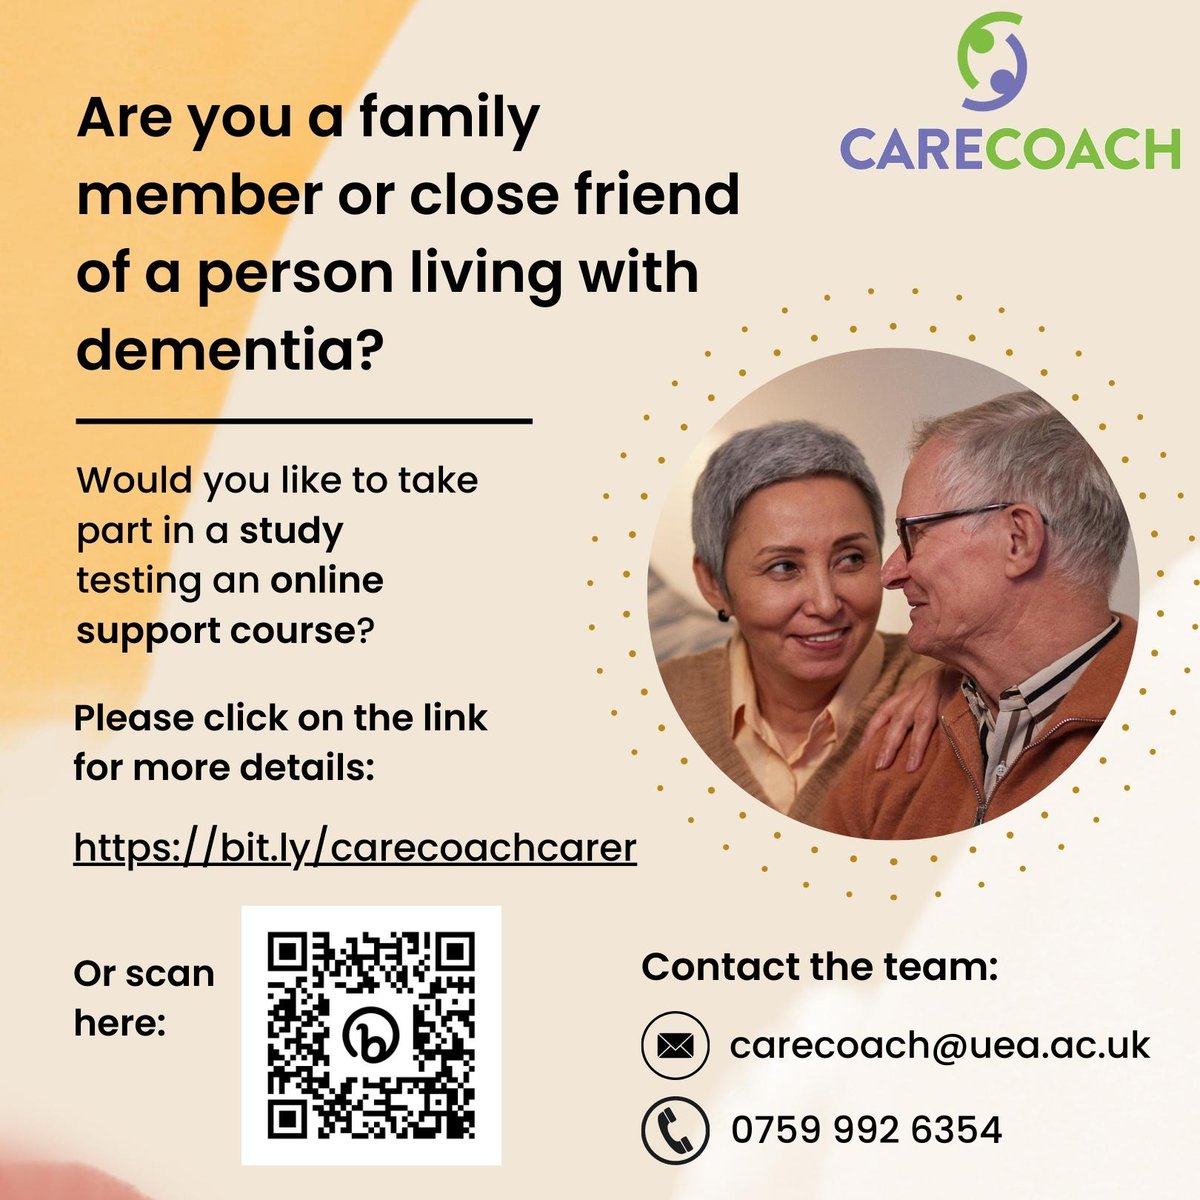 We are looking for people who care (help with appointments, shopping etc) for people living with dementia to test a new online course (CareCoach). Follow the link for more information: bit.ly/carecoachcarer #carer #dementia #support #online #takepartinresearch